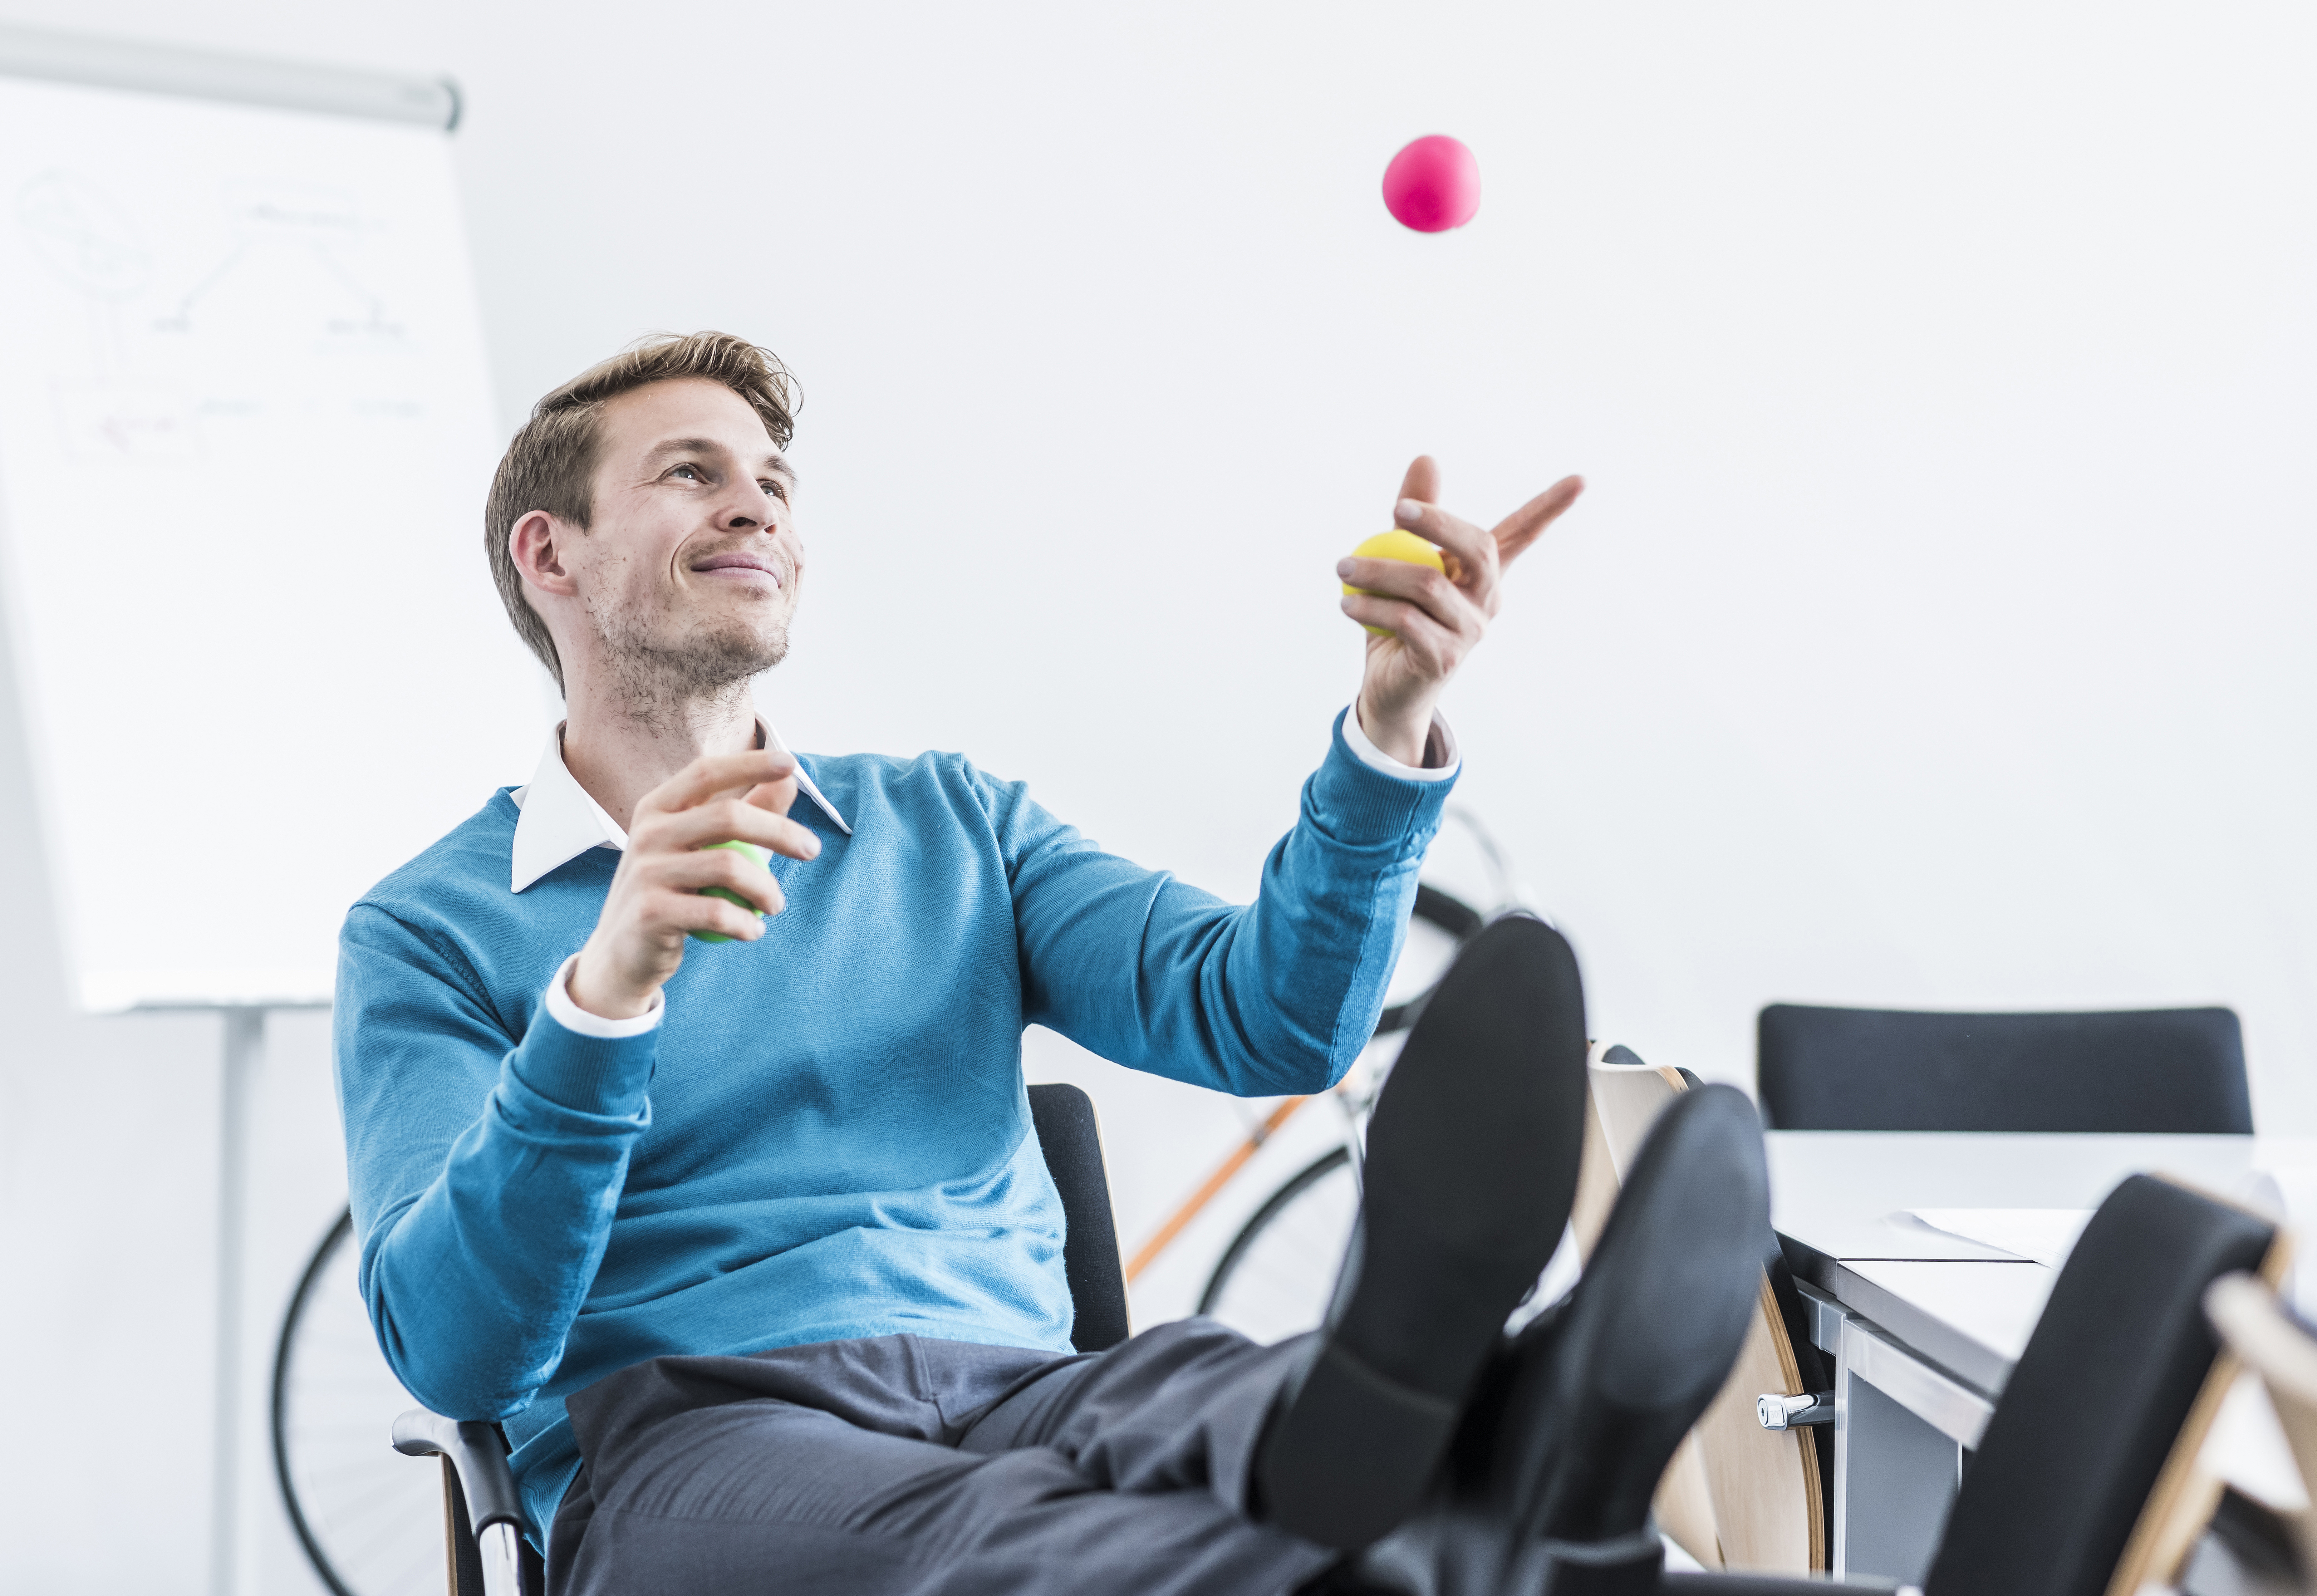 Smiling businessman juggling with balls in office